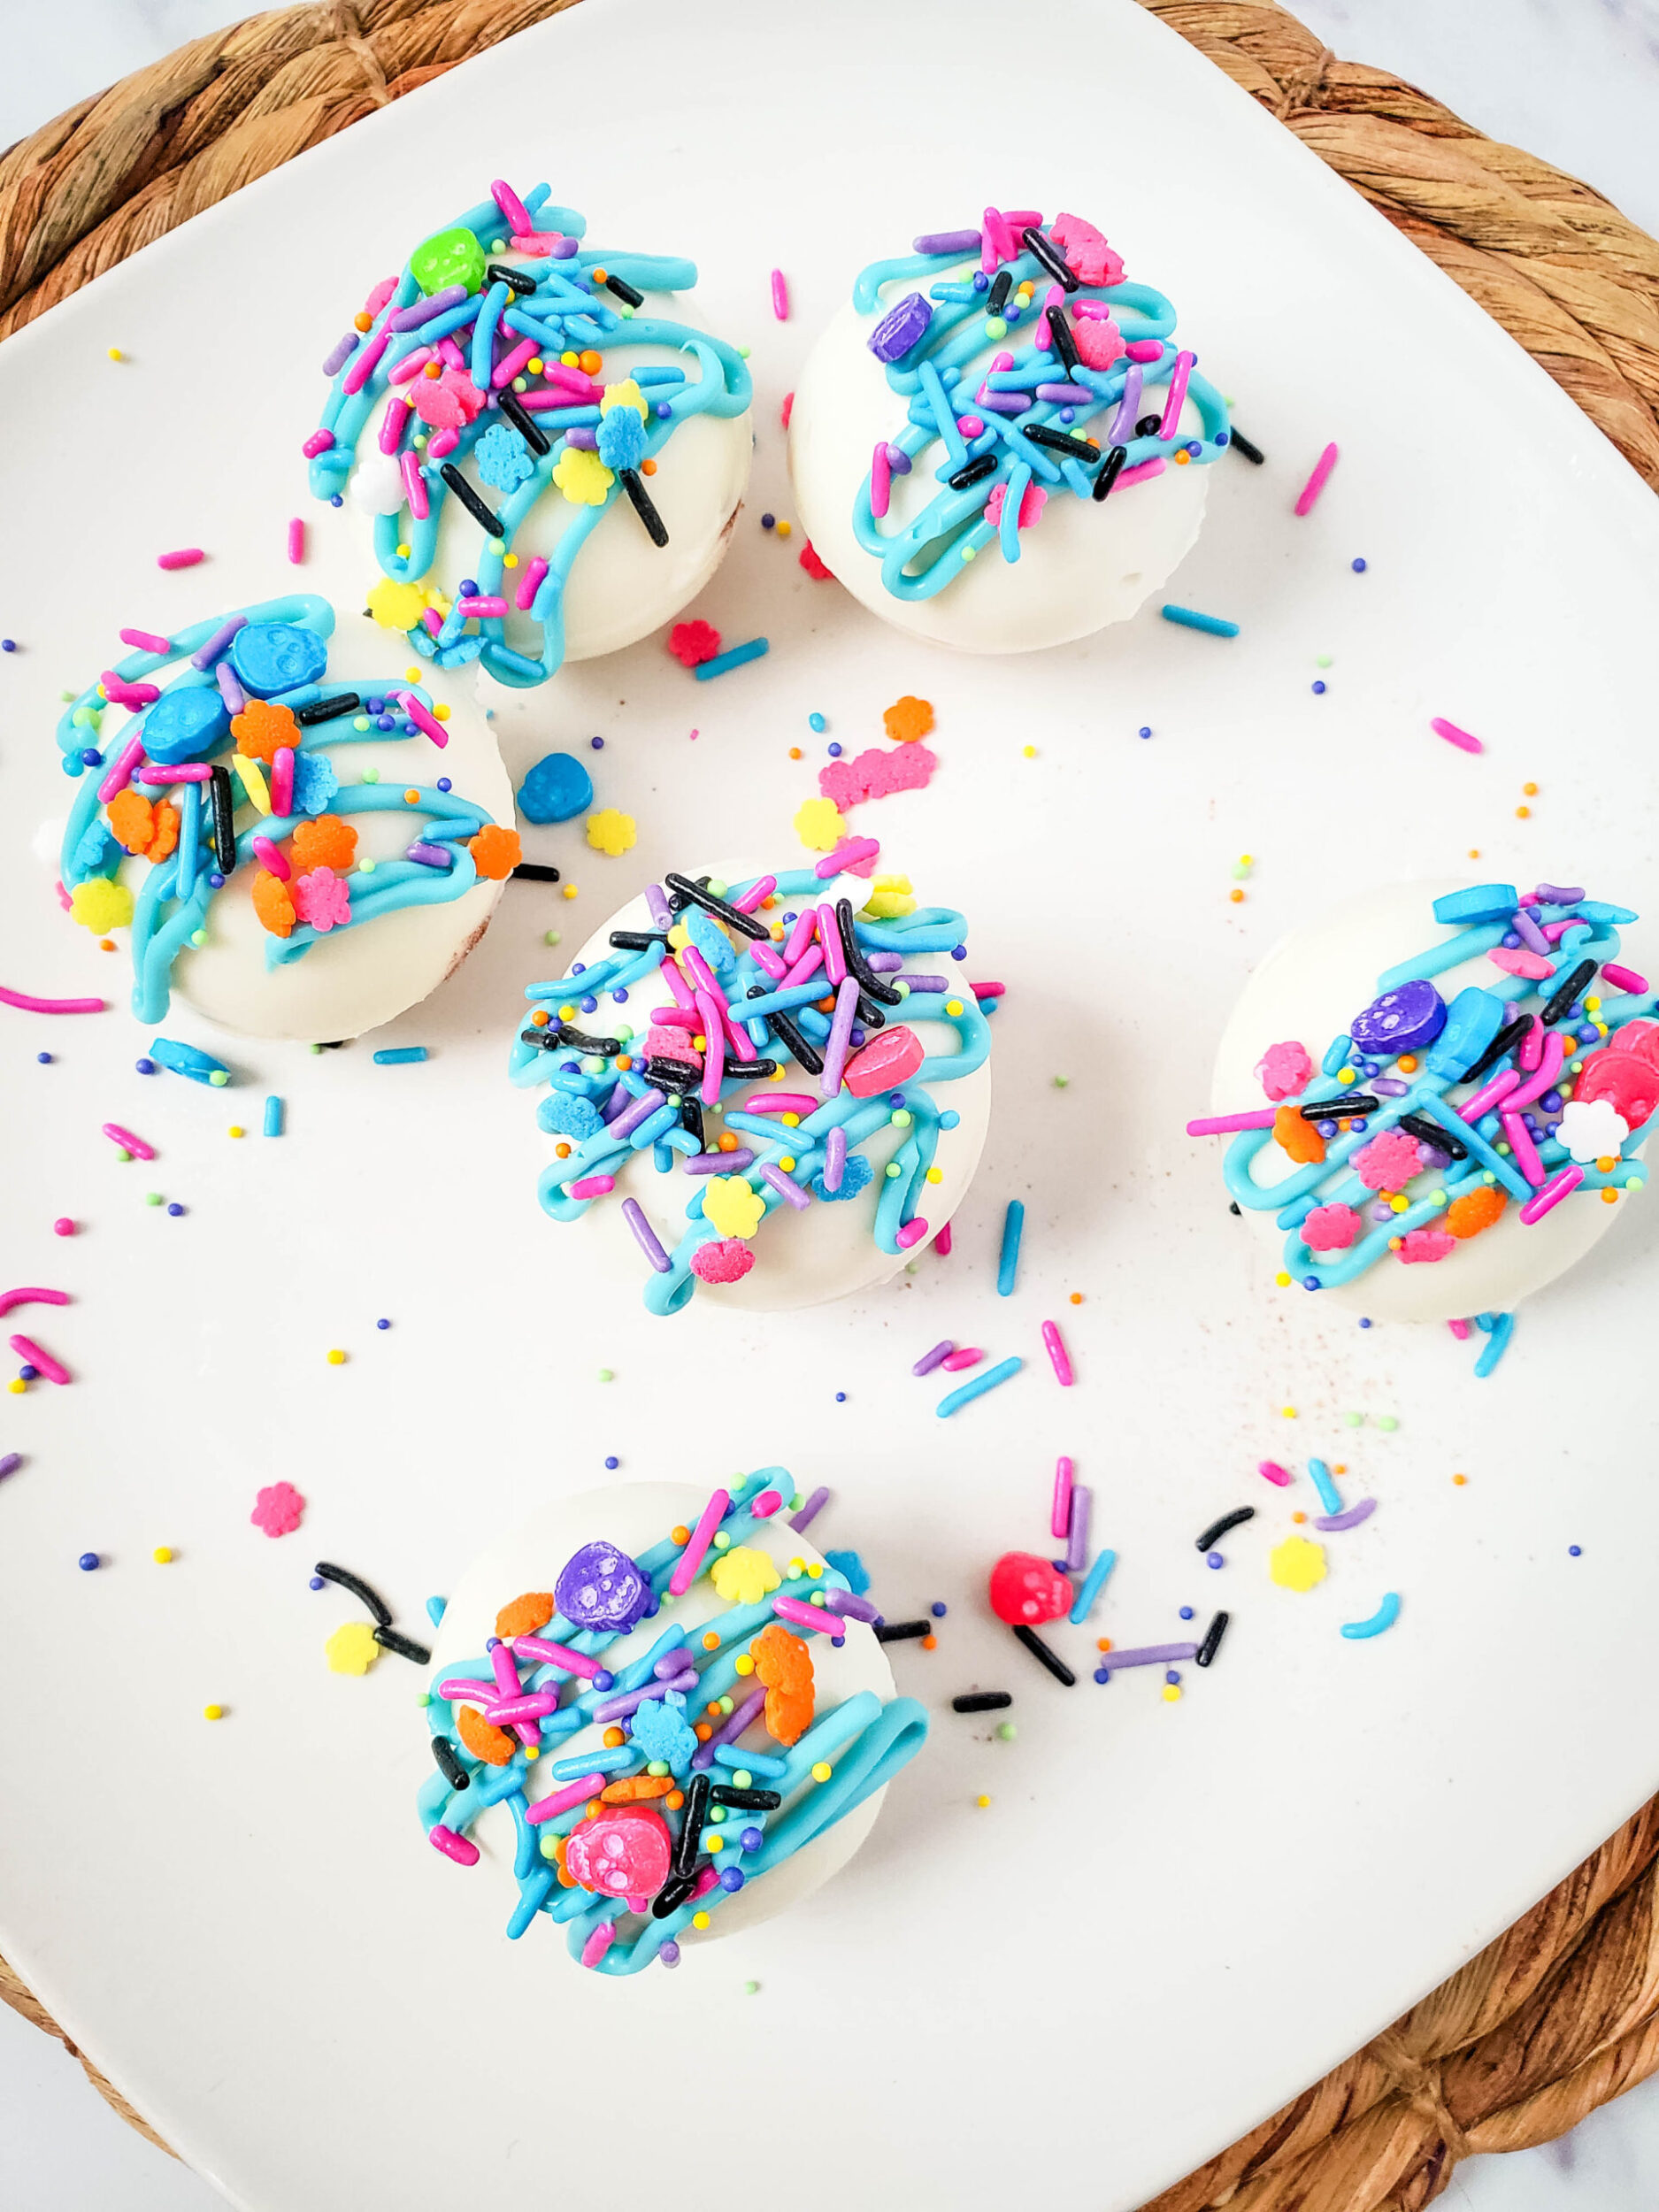 New Years Hot Cocoa Bombs With White Chocolate Recipe